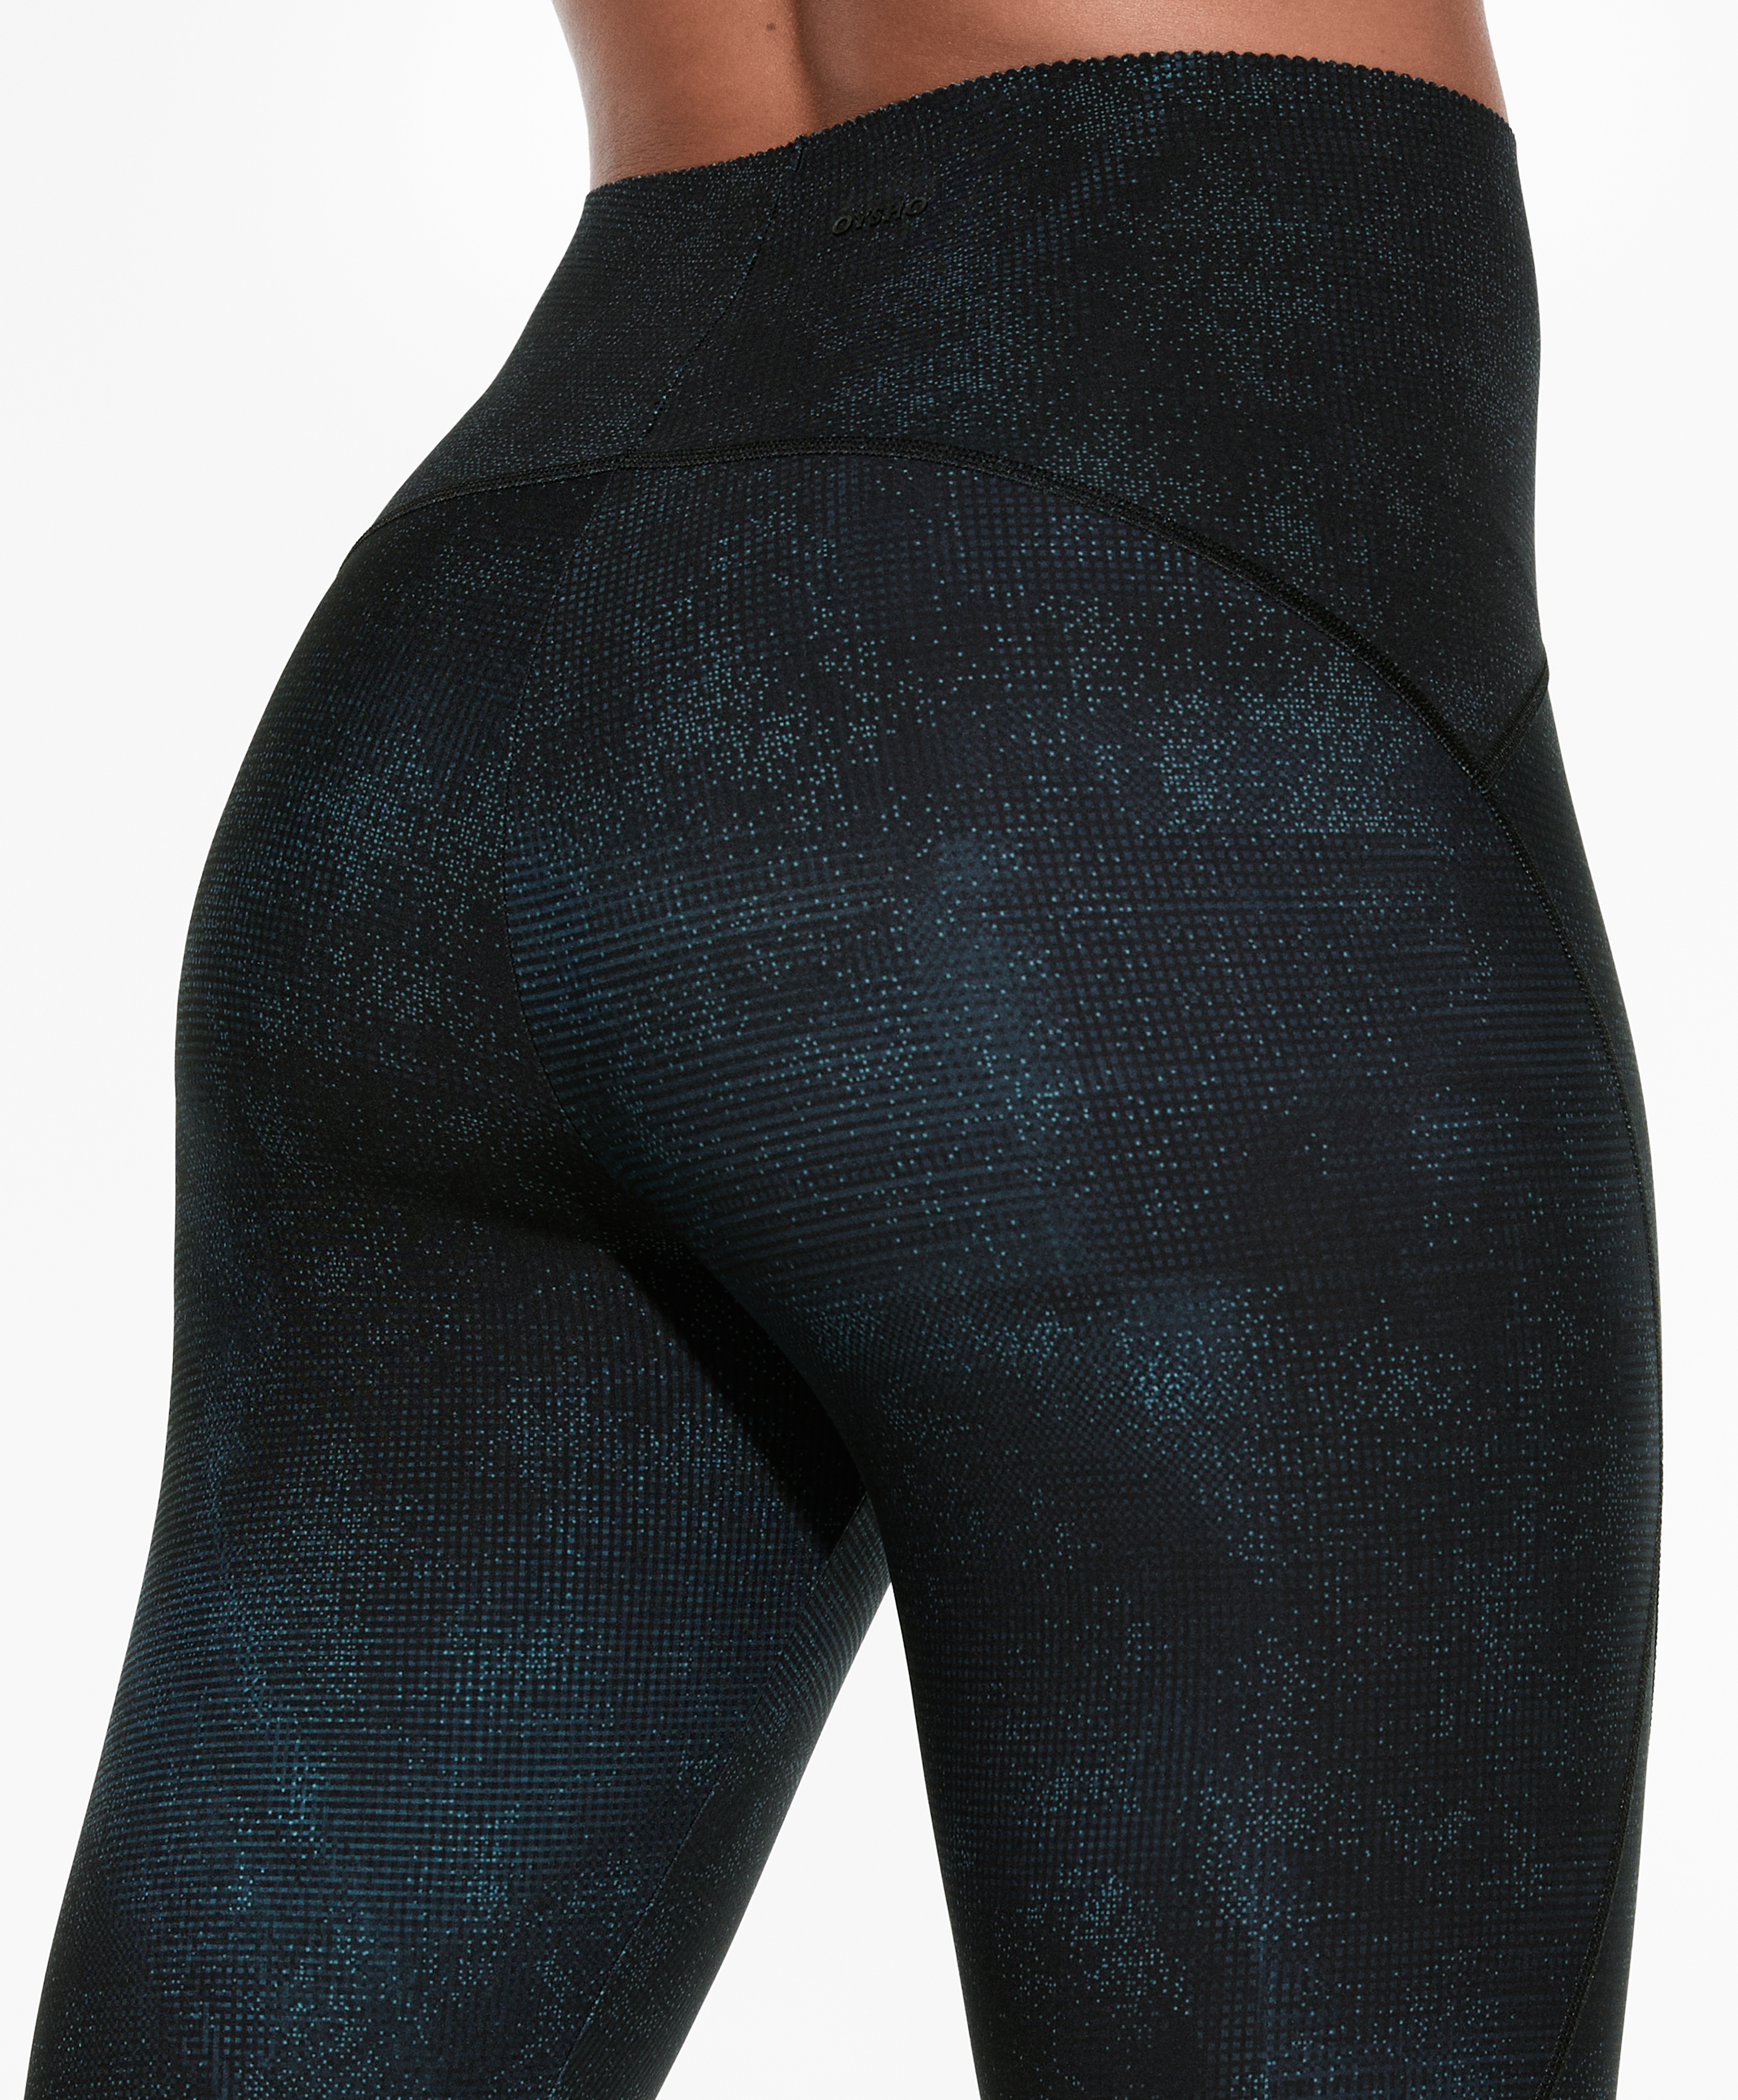 Ankle-length compressive leggings with sheer panels